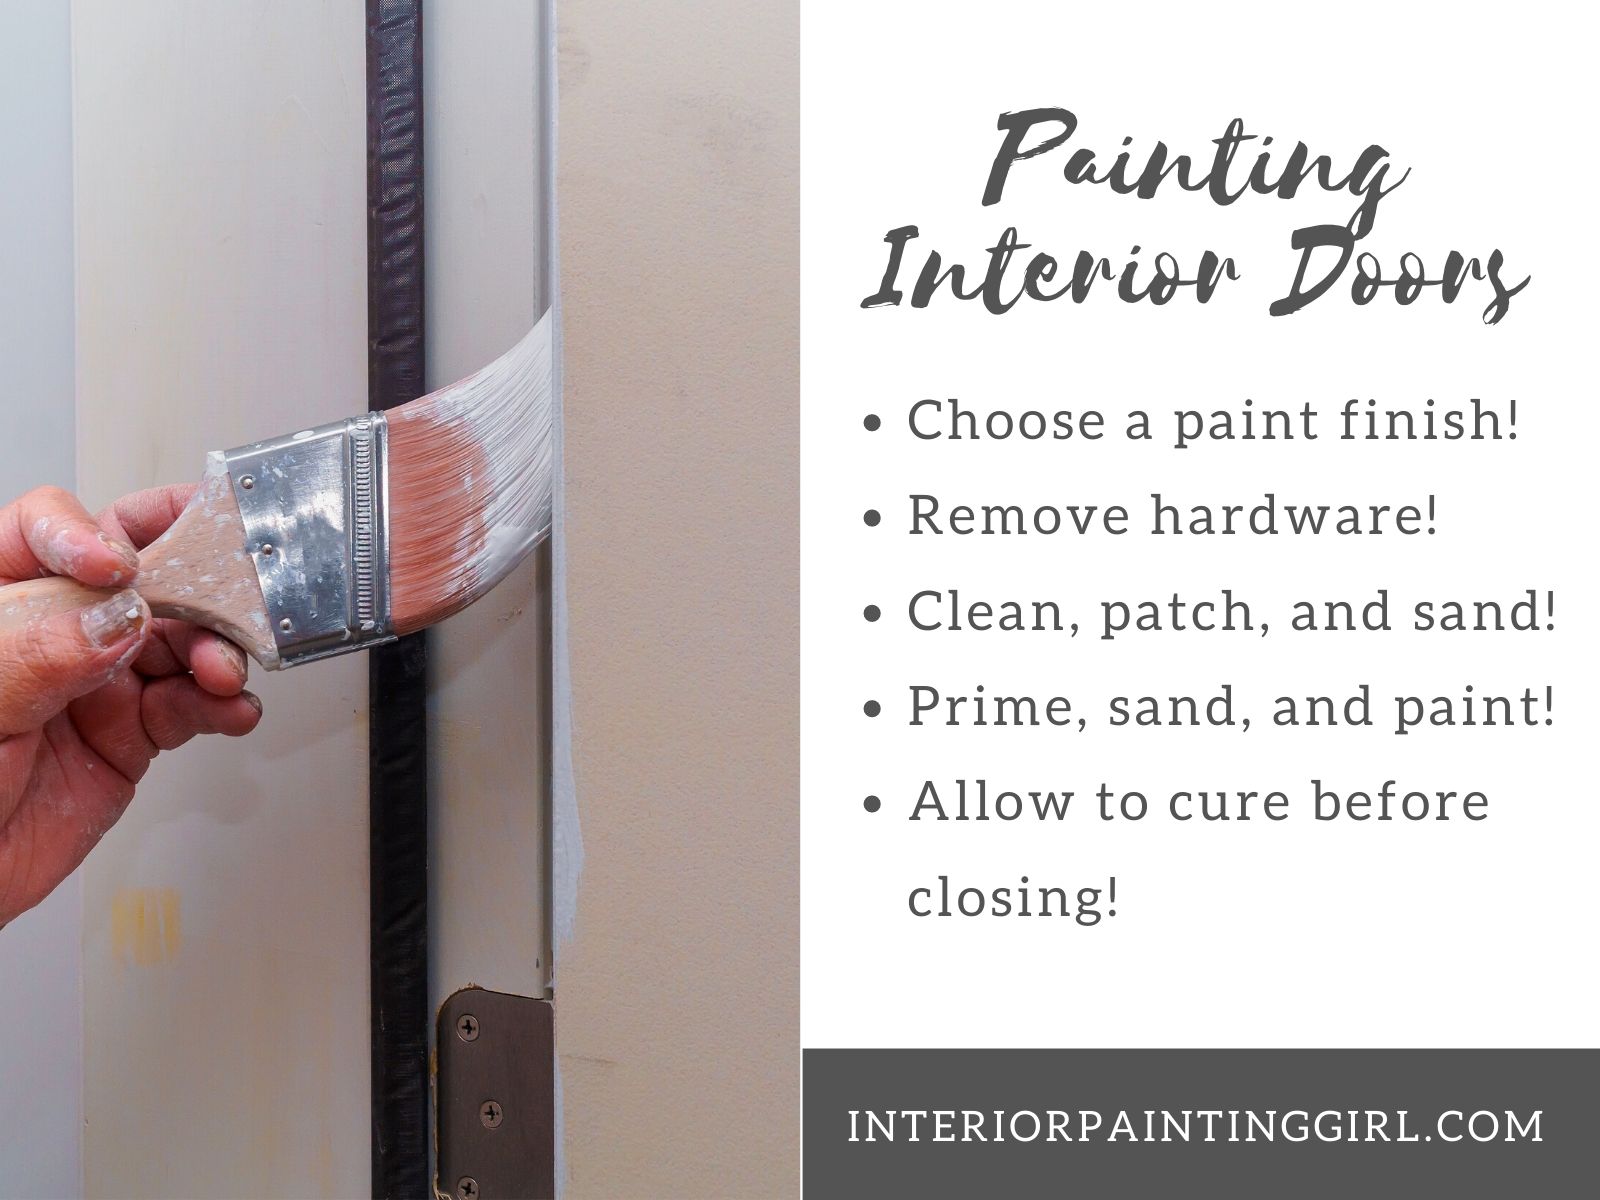 Painting Interior Doors Step-by-Step - THAT Interior Painting Girl!